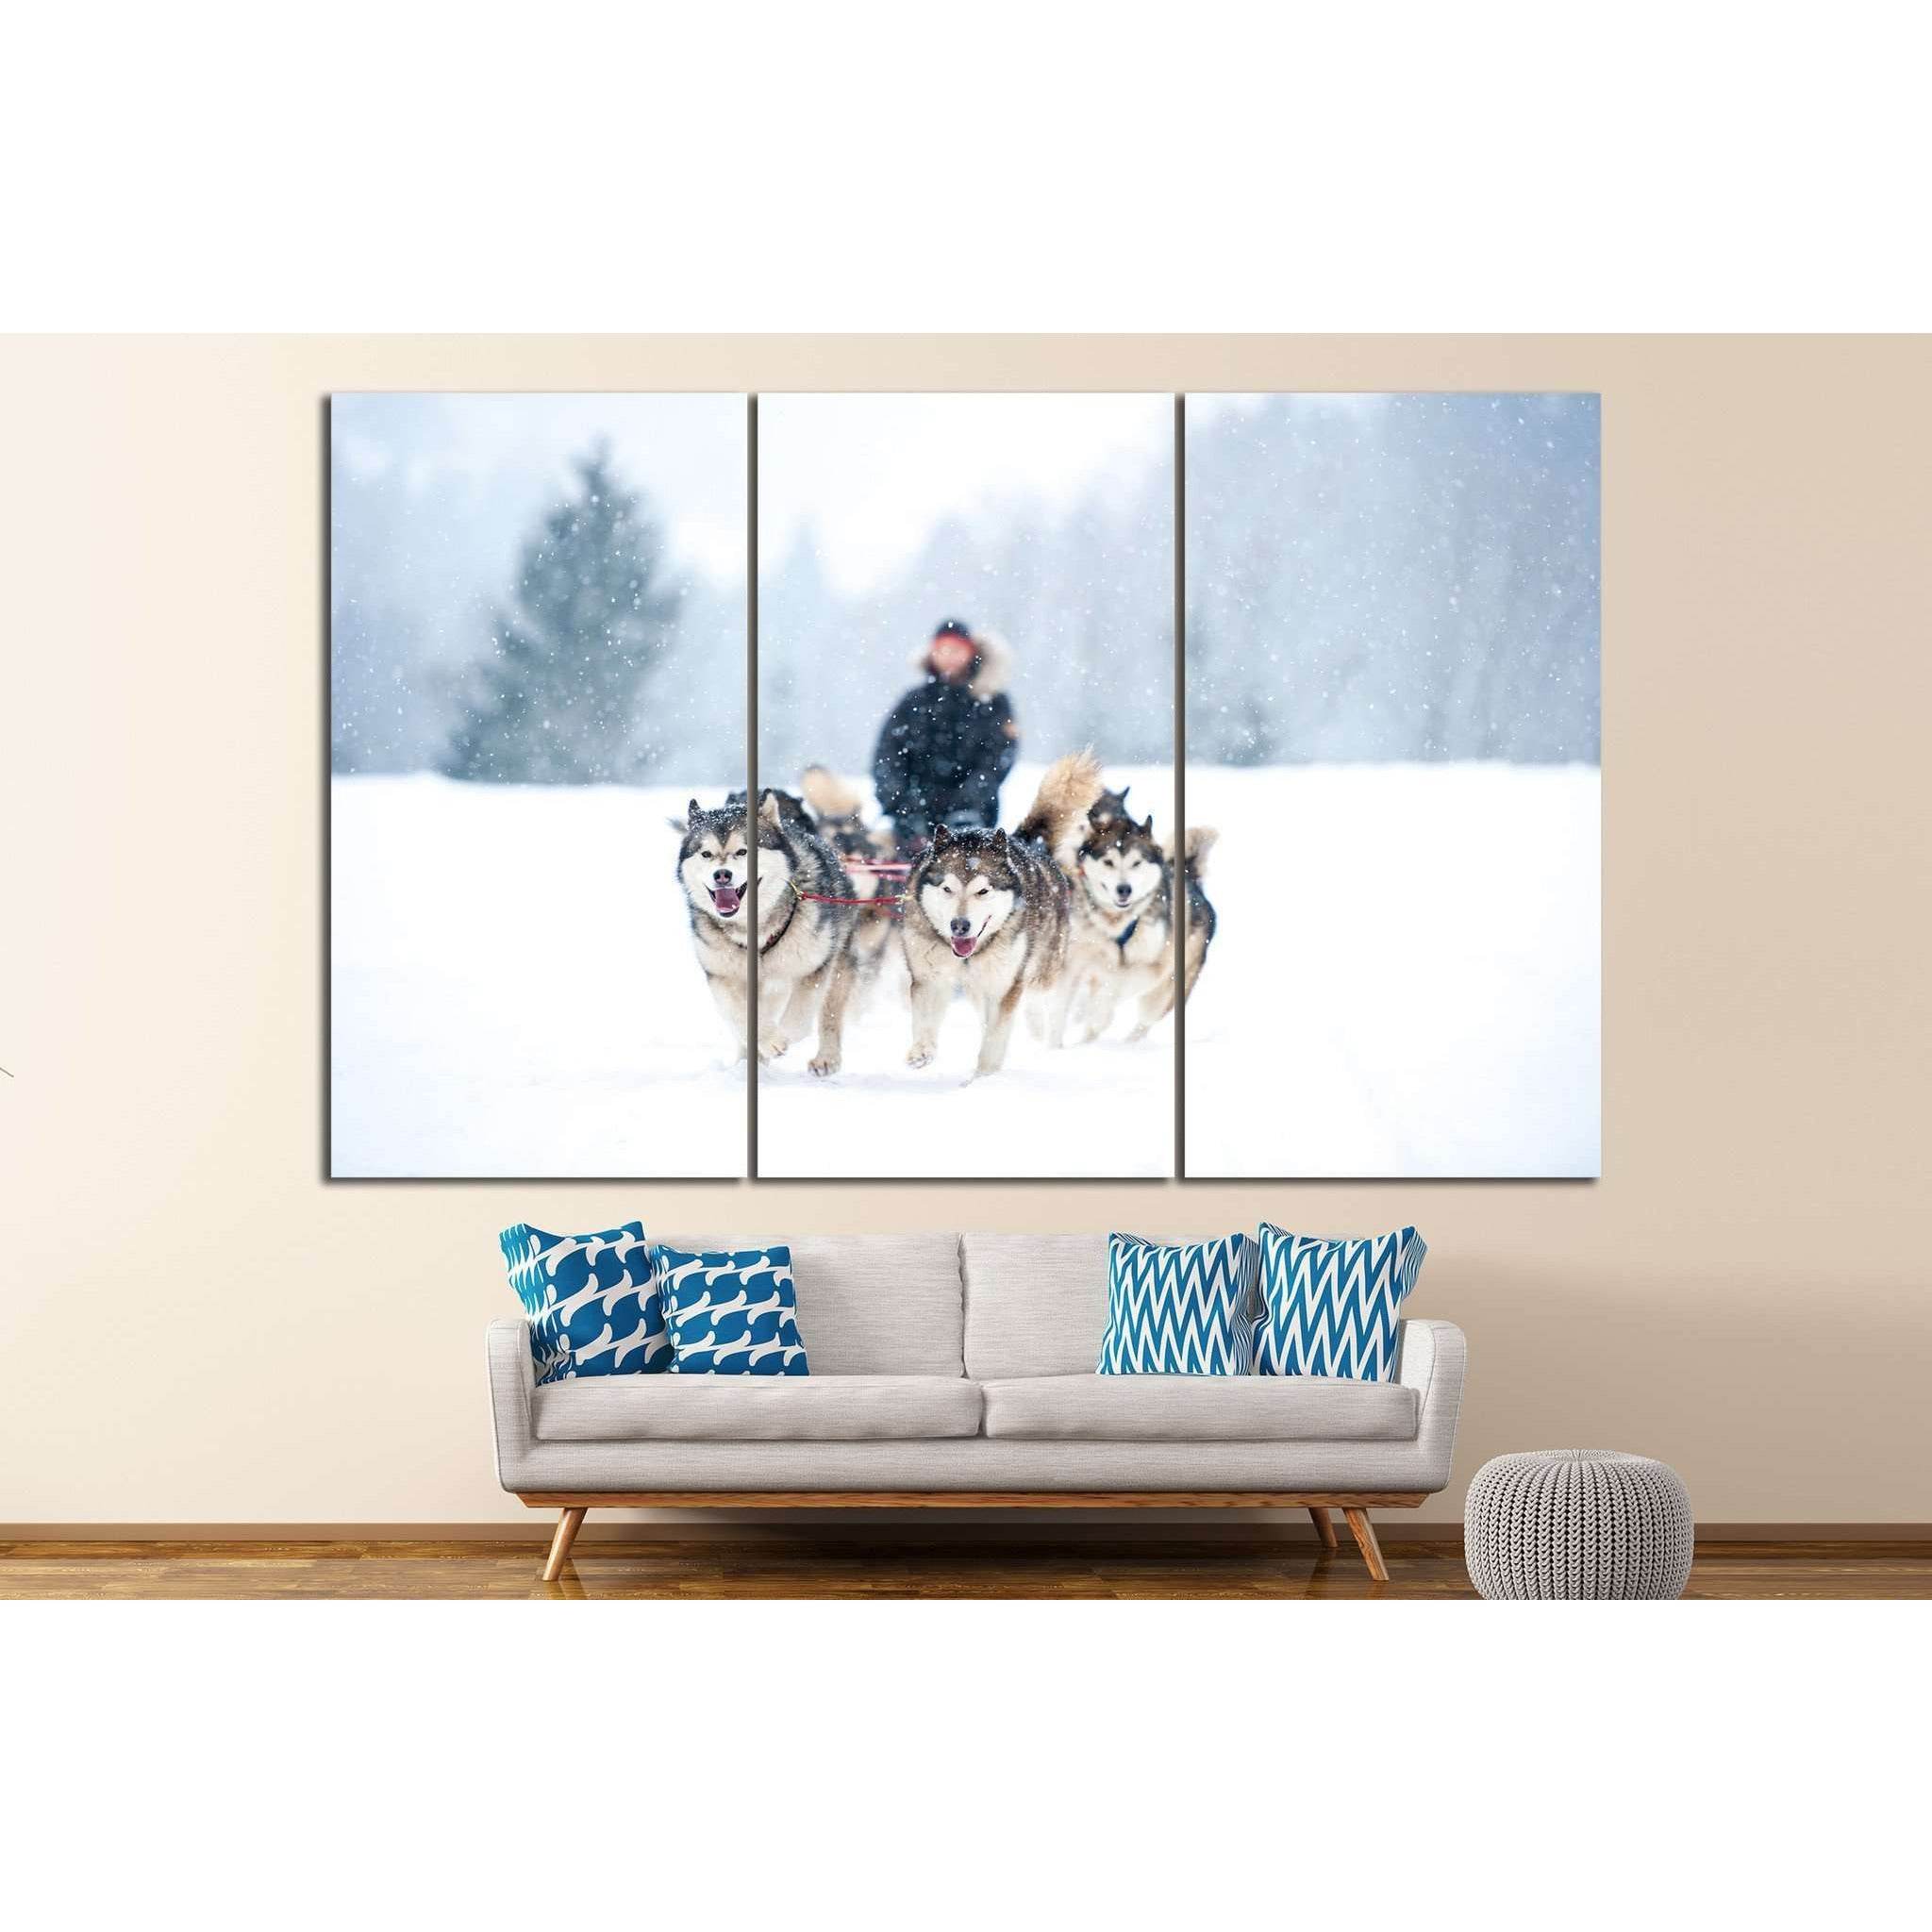 Dogs team and Snow №7 Ready to Hang Canvas Print